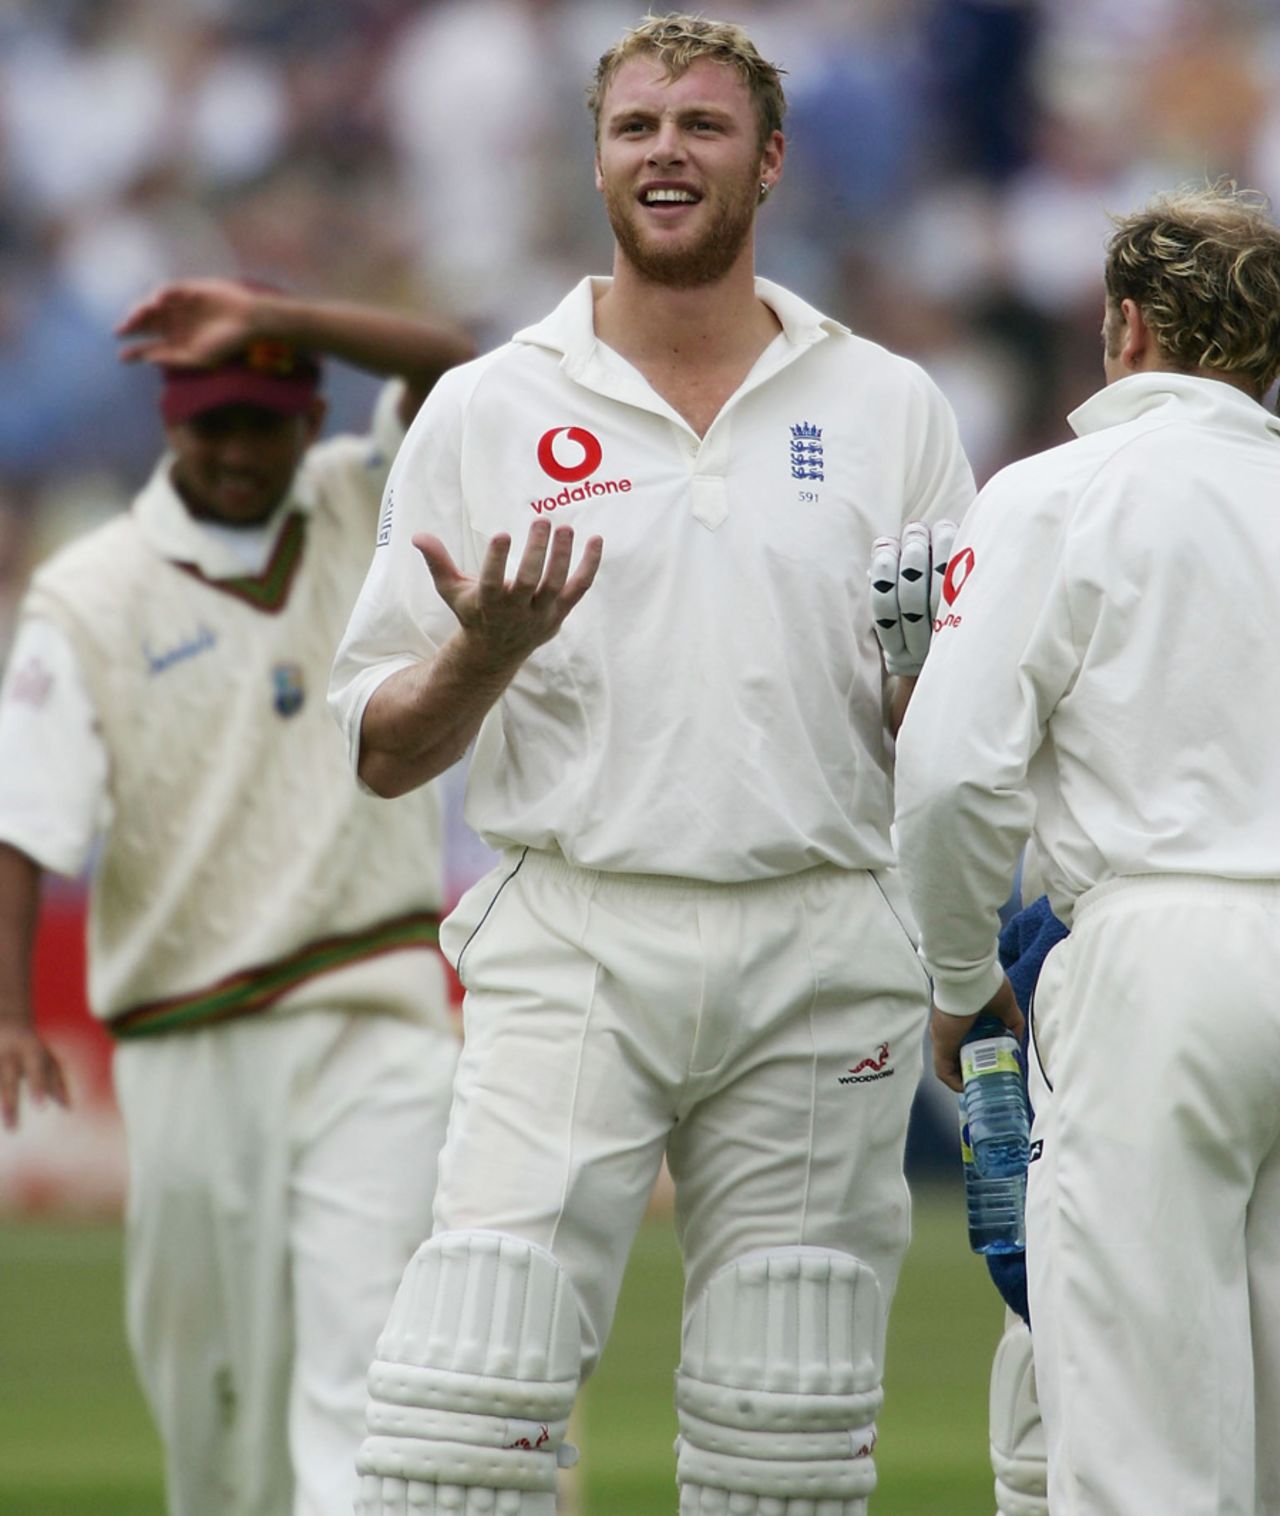 Andrew Flintoff is amused by his father's unsuccessful attempt to catch his six in the stands, England v West Indies, 2nd Test, 2nd day, July 30, 2004